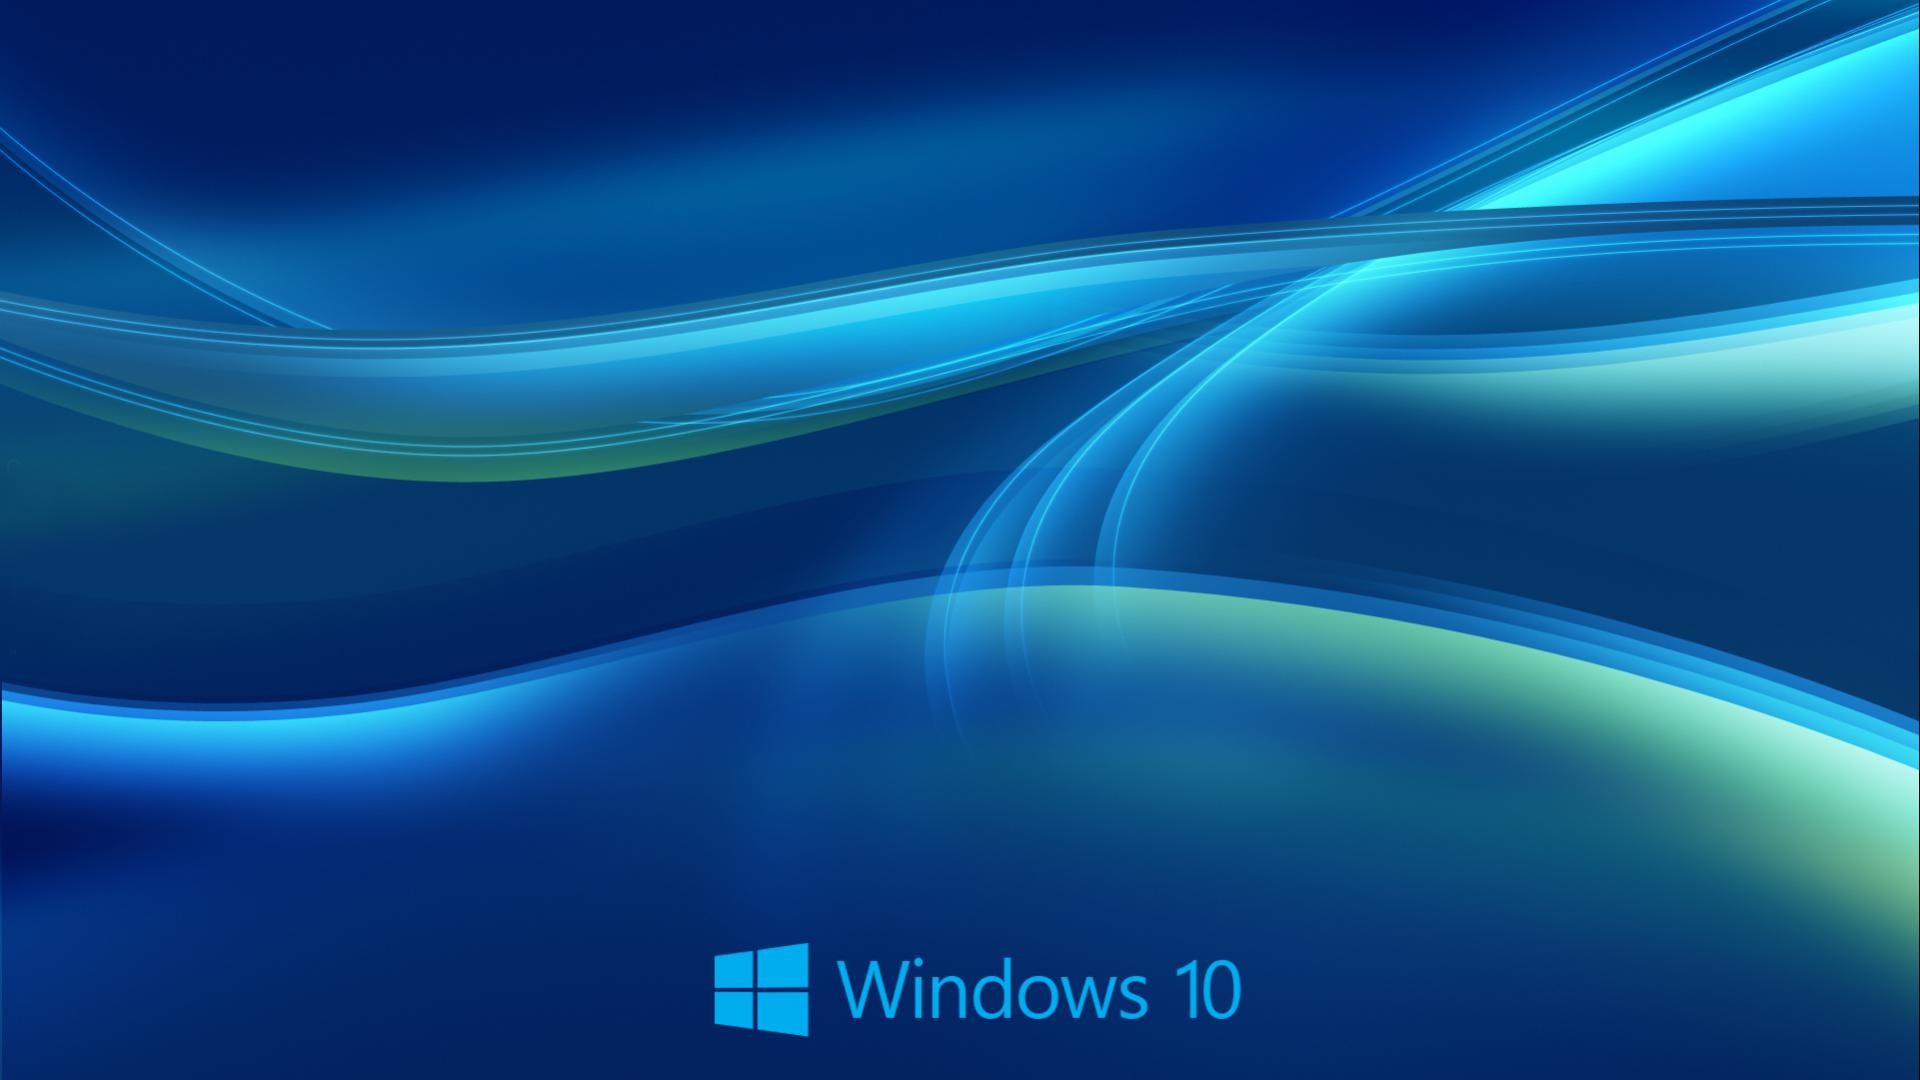 1920x1080 Windows 10 Wallpaper HD in Blue Abstract with New Logo HD Wallpapers  